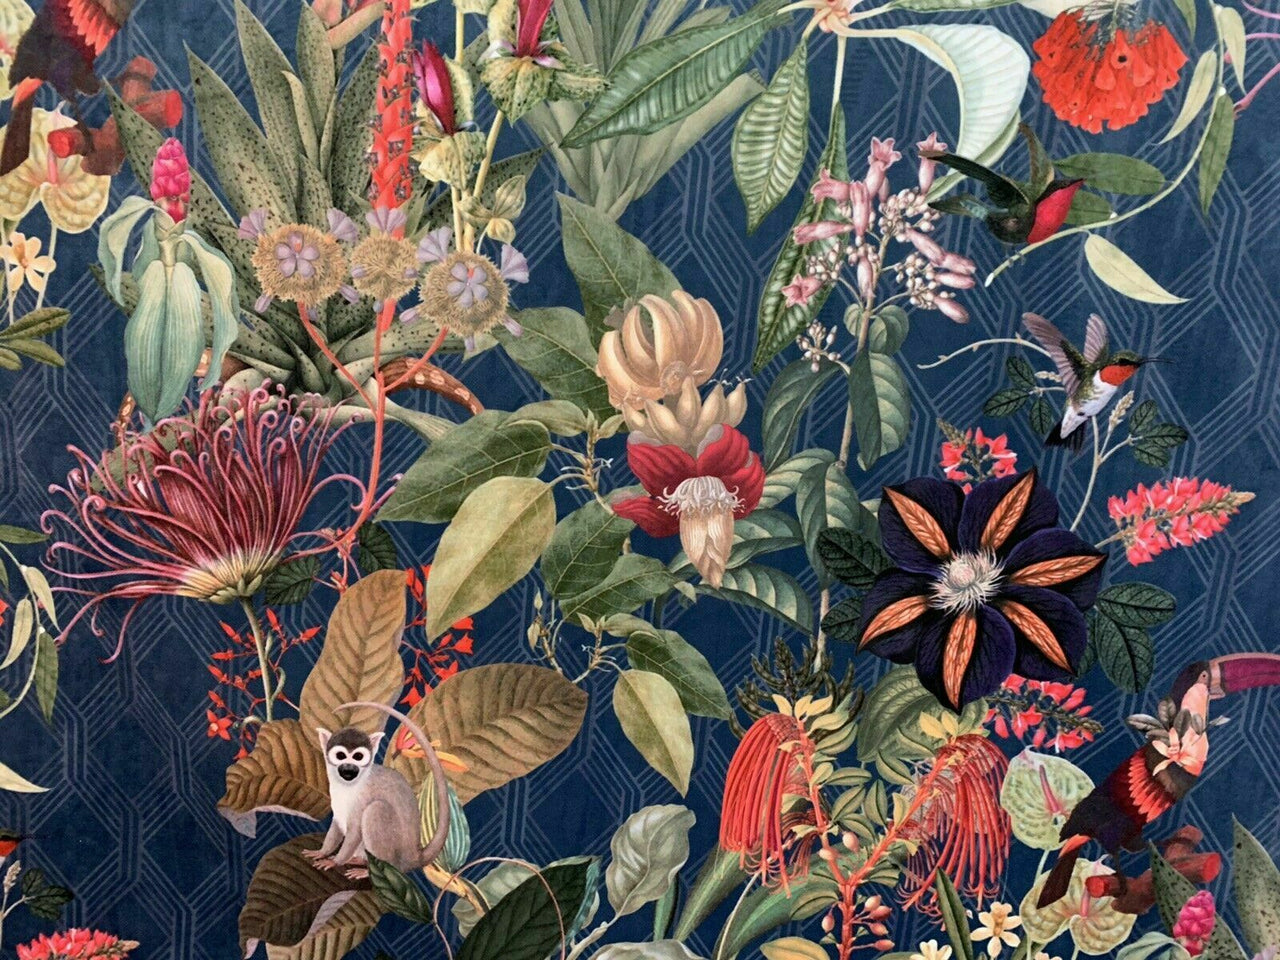 Toucan Colibri Jungle Fabric By The Meters Blue Sewing Material Art Deco Botanical Velvet Textile